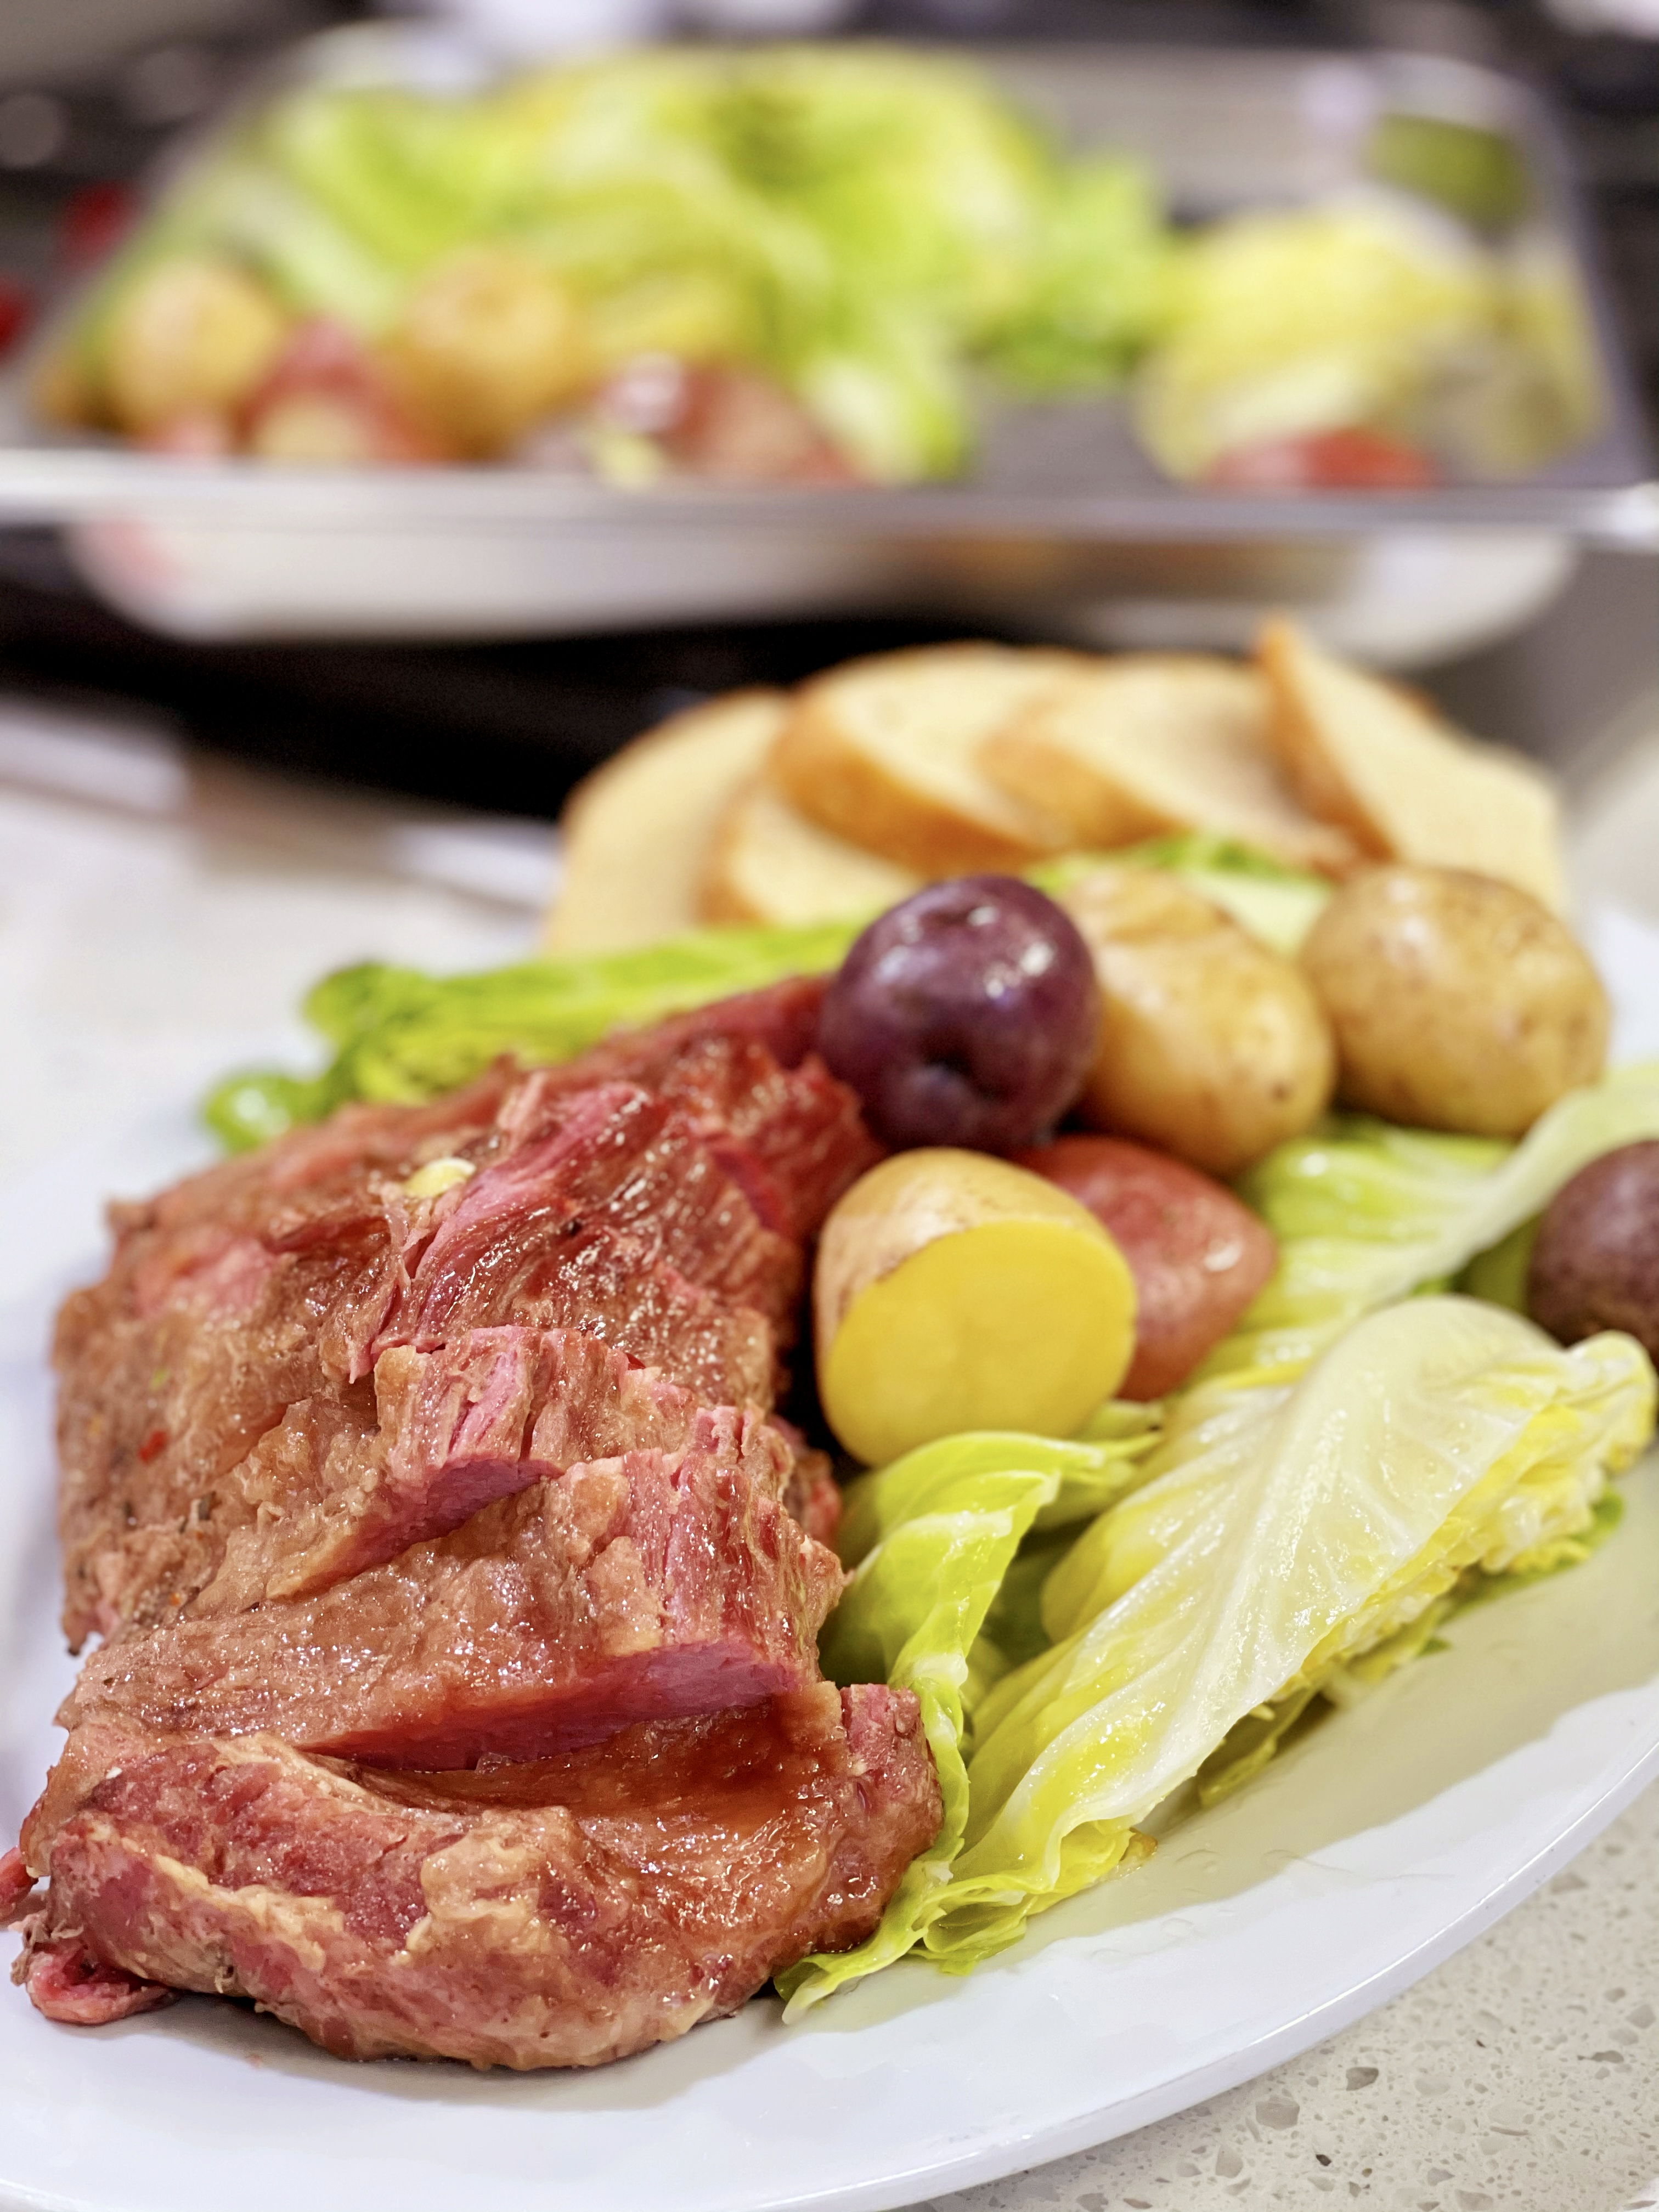 https://cookingwithchefbryan.com/wp-content/uploads/2018/03/Corned-Beef-Cabbage-and-Potatoes.jpg